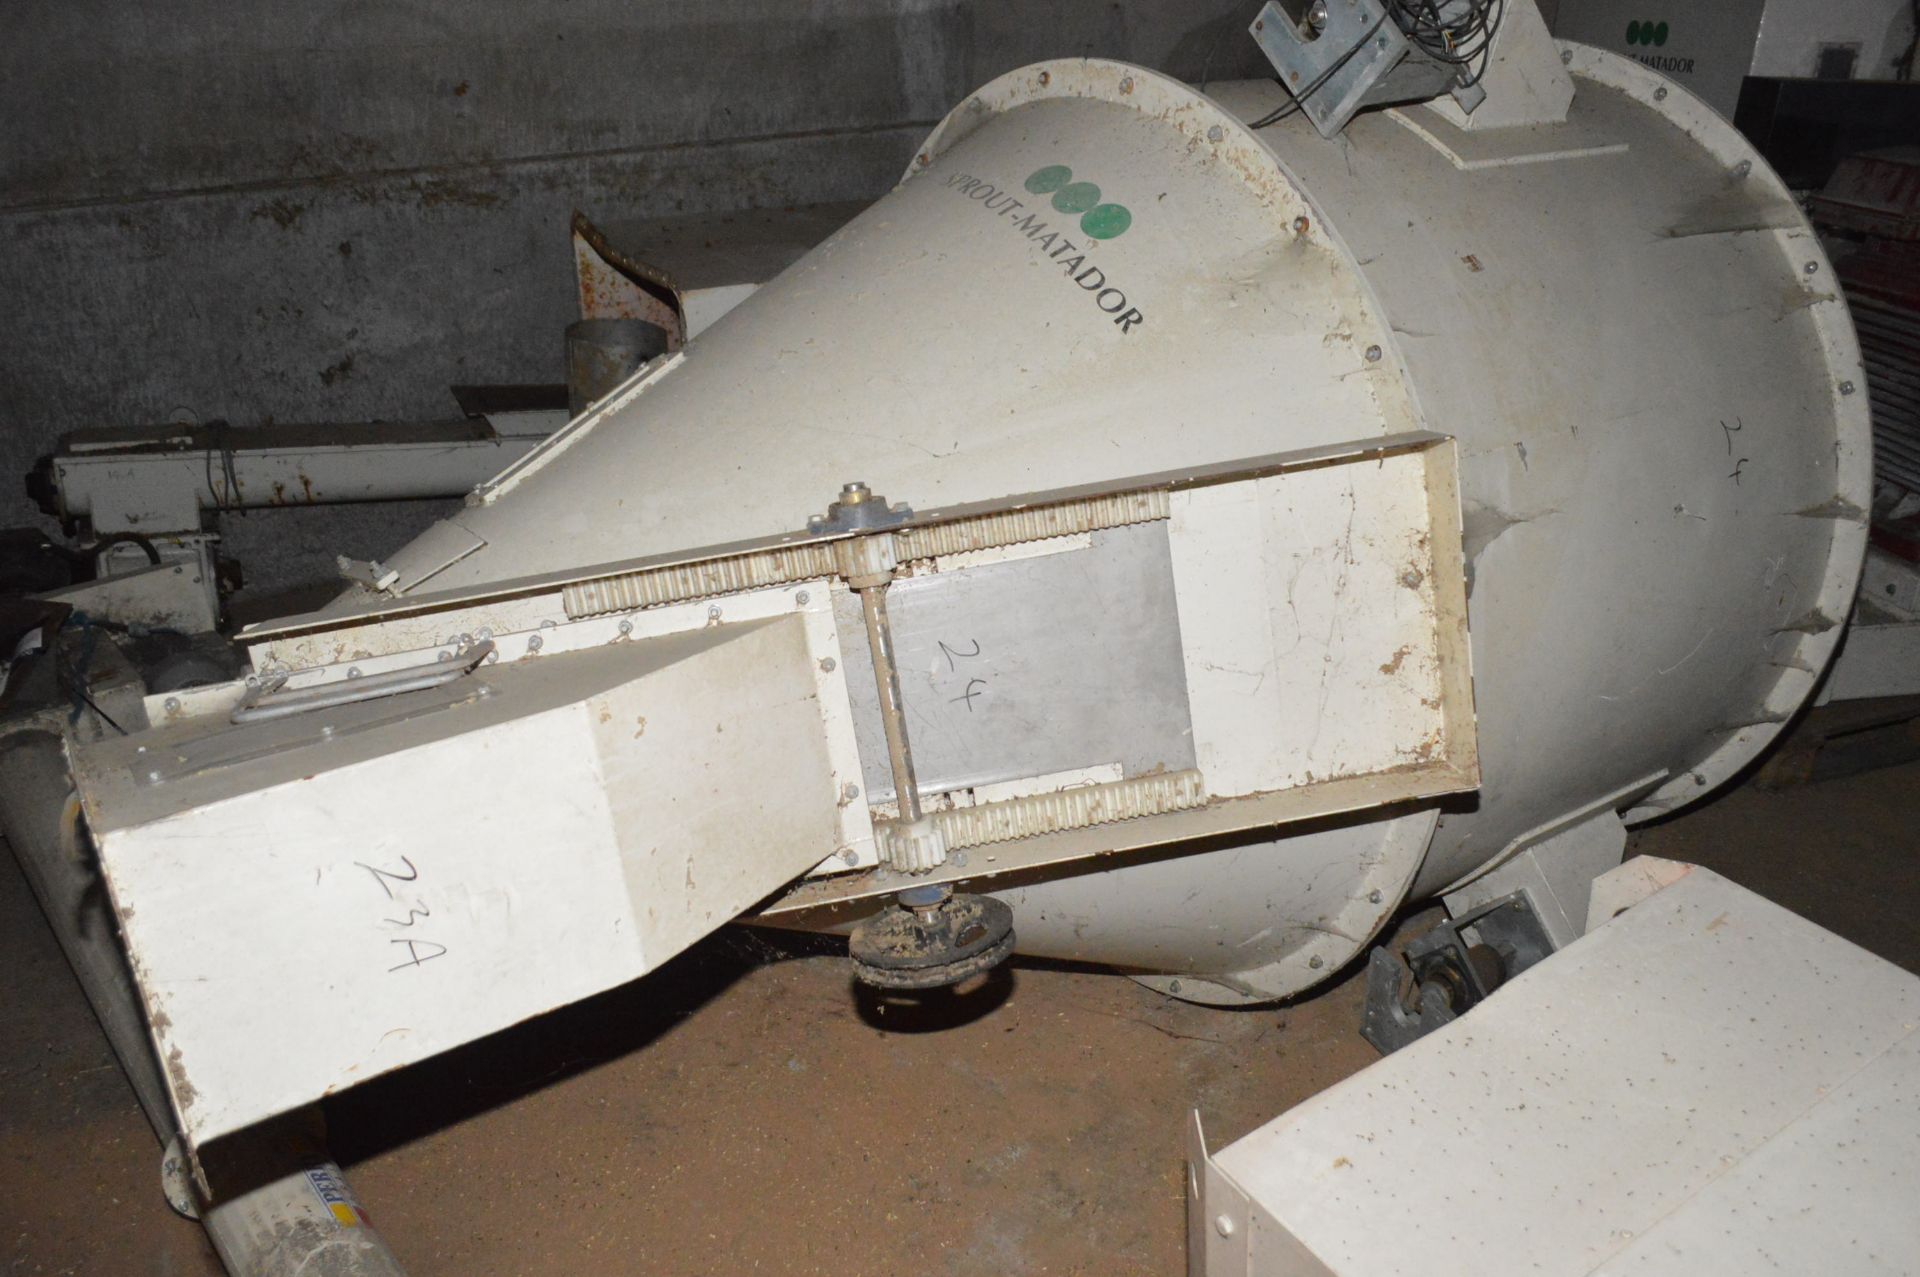 Sprout-Matador I/B15 VERTICAL FOUNTAIN MIXER / WEIGHER, ID no. 057537, spec. no. 011200, year of